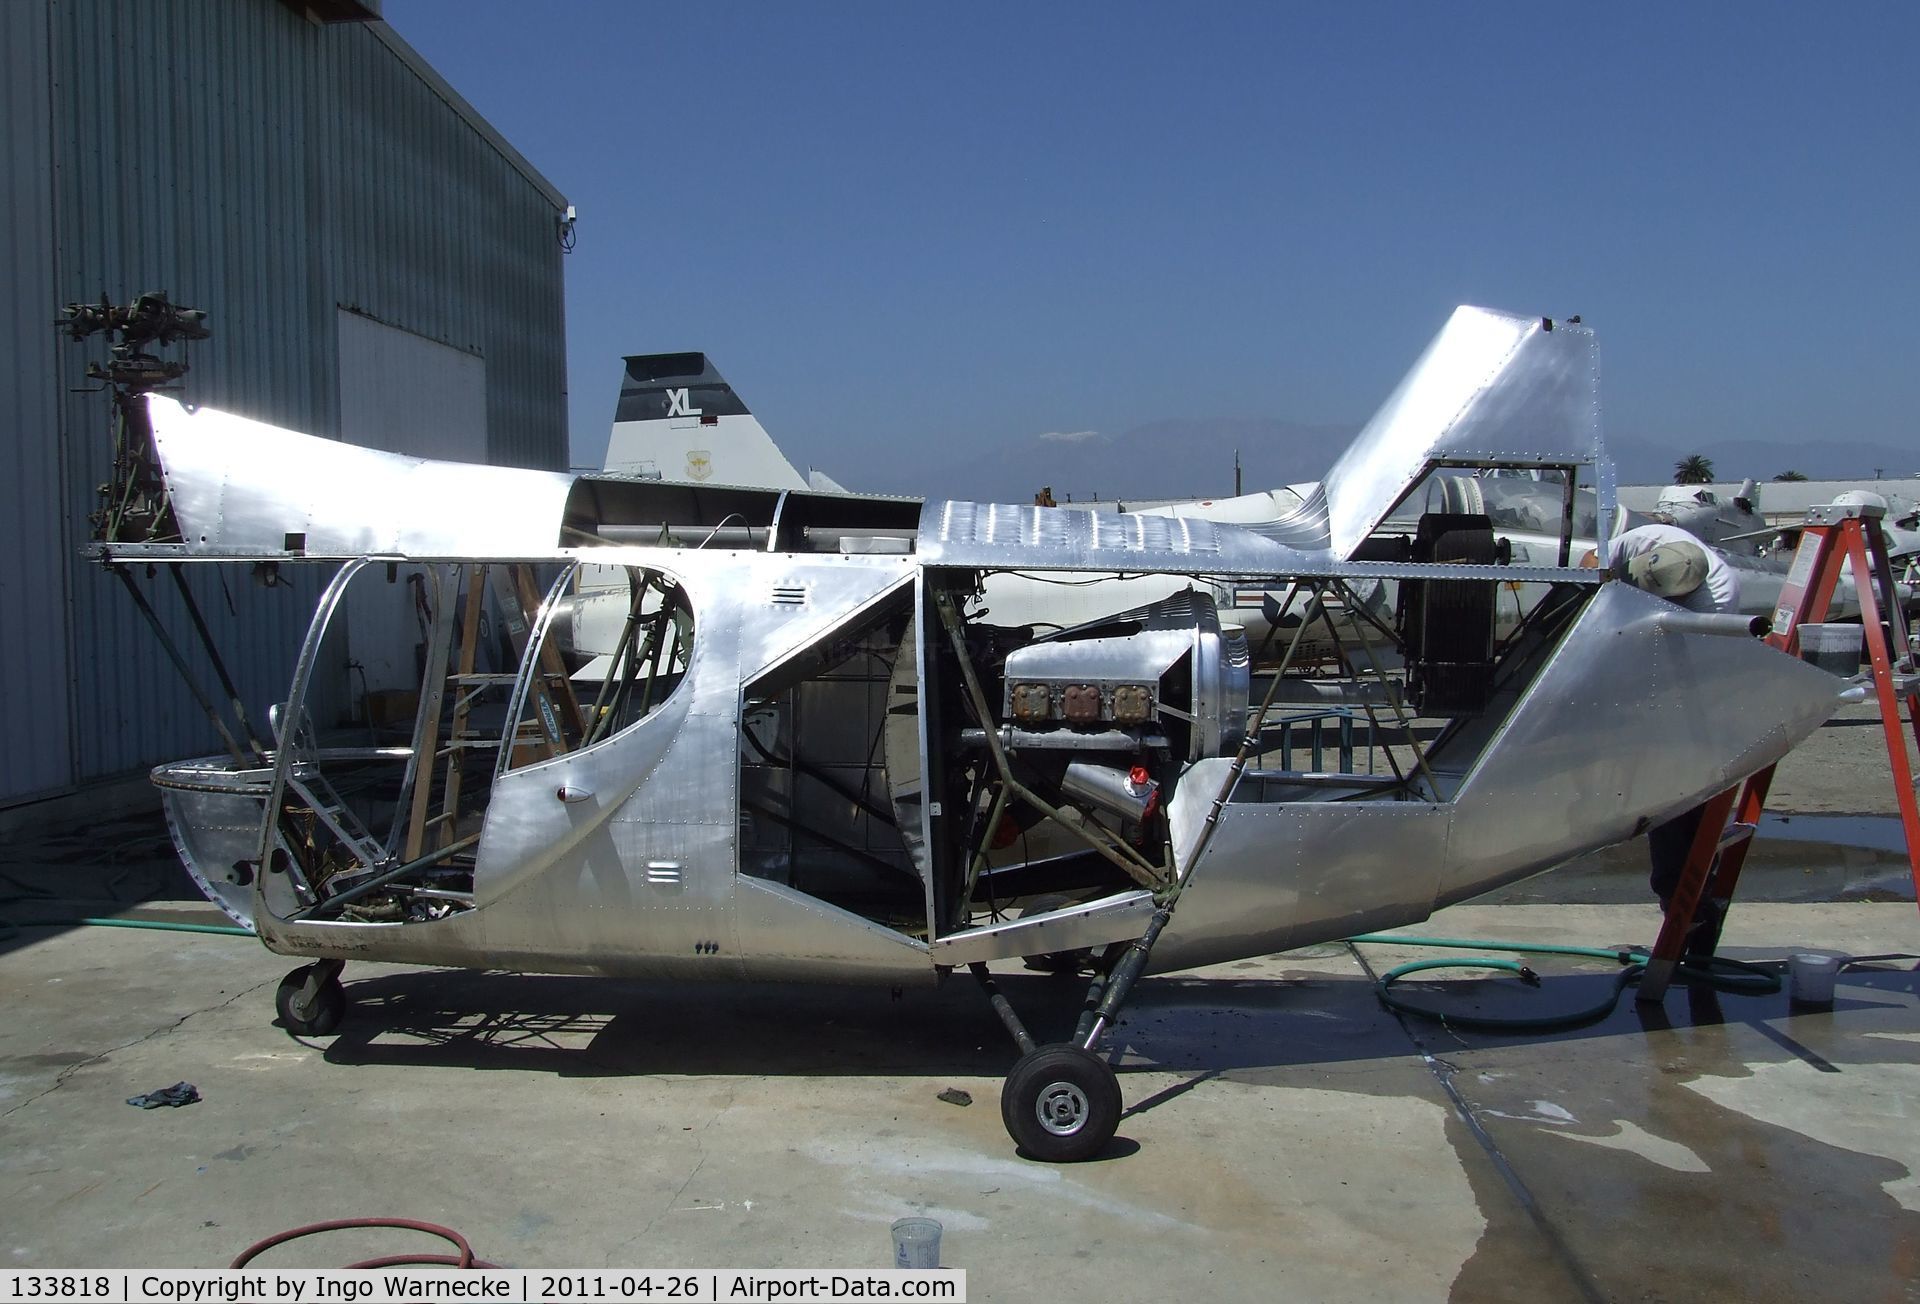 133818, 1952 McCulloch XHUM-1 C/N 1001, McCulloch XHUM-1, being restored at the Yanks Air Museum, Chino CA